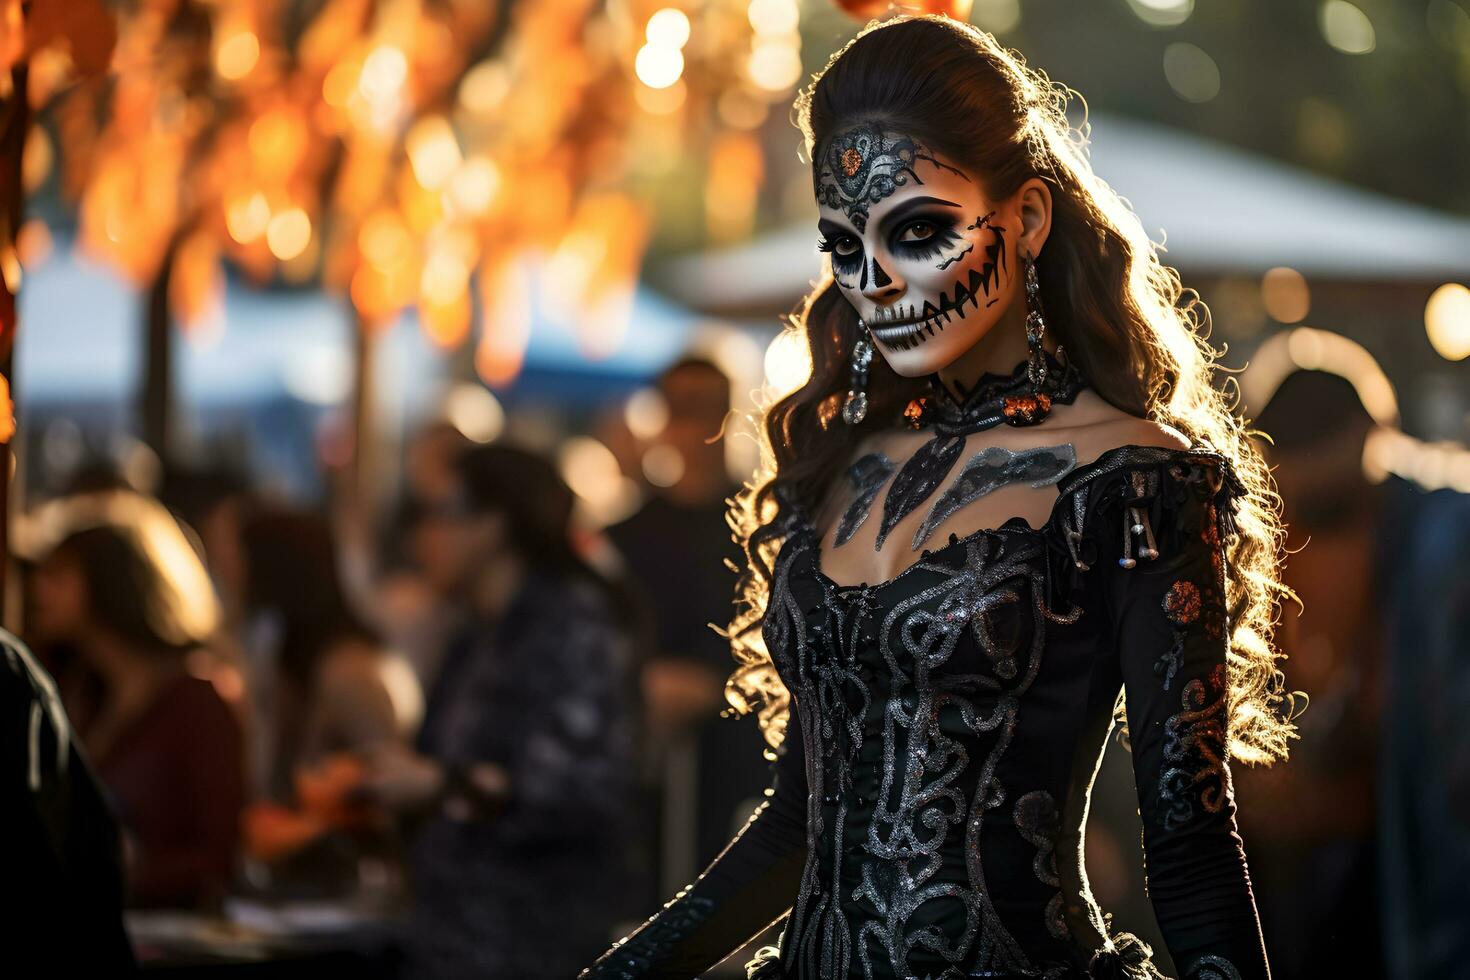 Beautiful closeup portrait of young woman in traditional Calavera Catrina outfit and makeup for the Day of the Dead at the national Mexican festival. AI generated photo